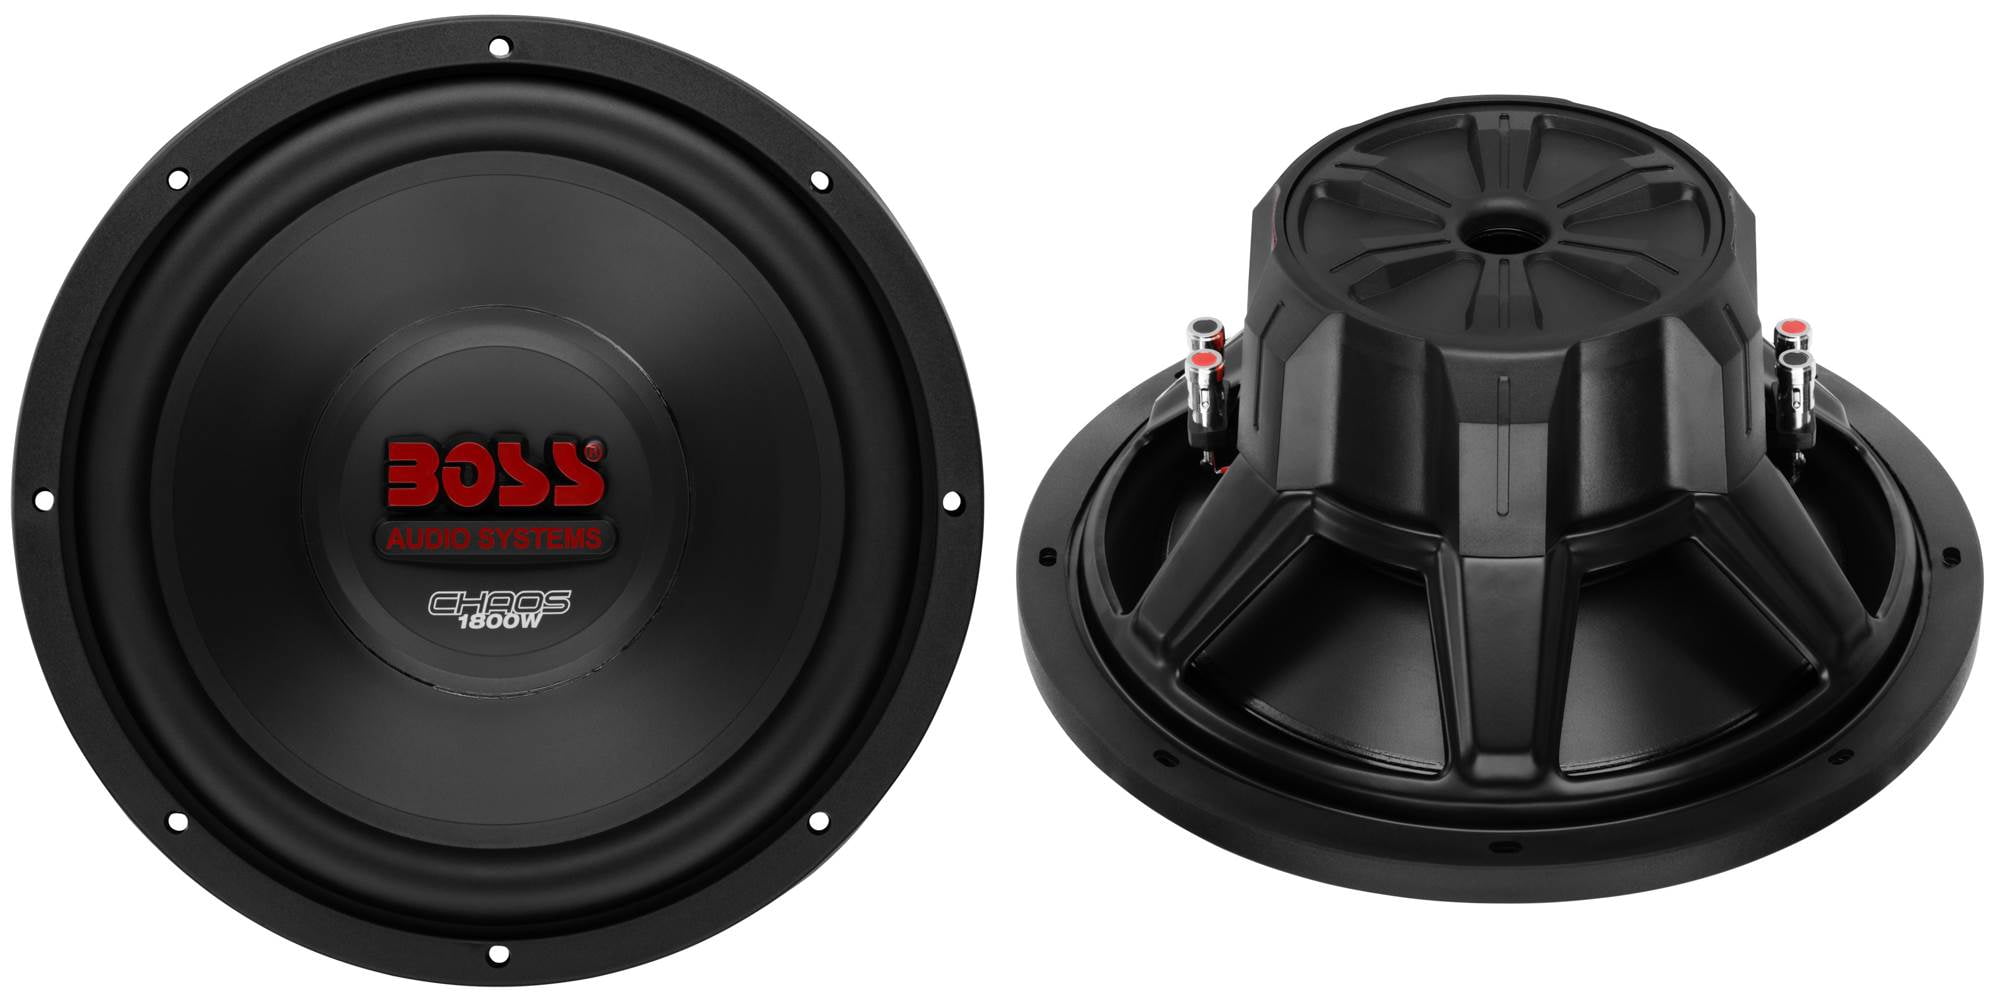 NEW 12" DVC 1600w Subwoofer Bass.Replacement.Speaker.Blue Led lights.Car Audio.